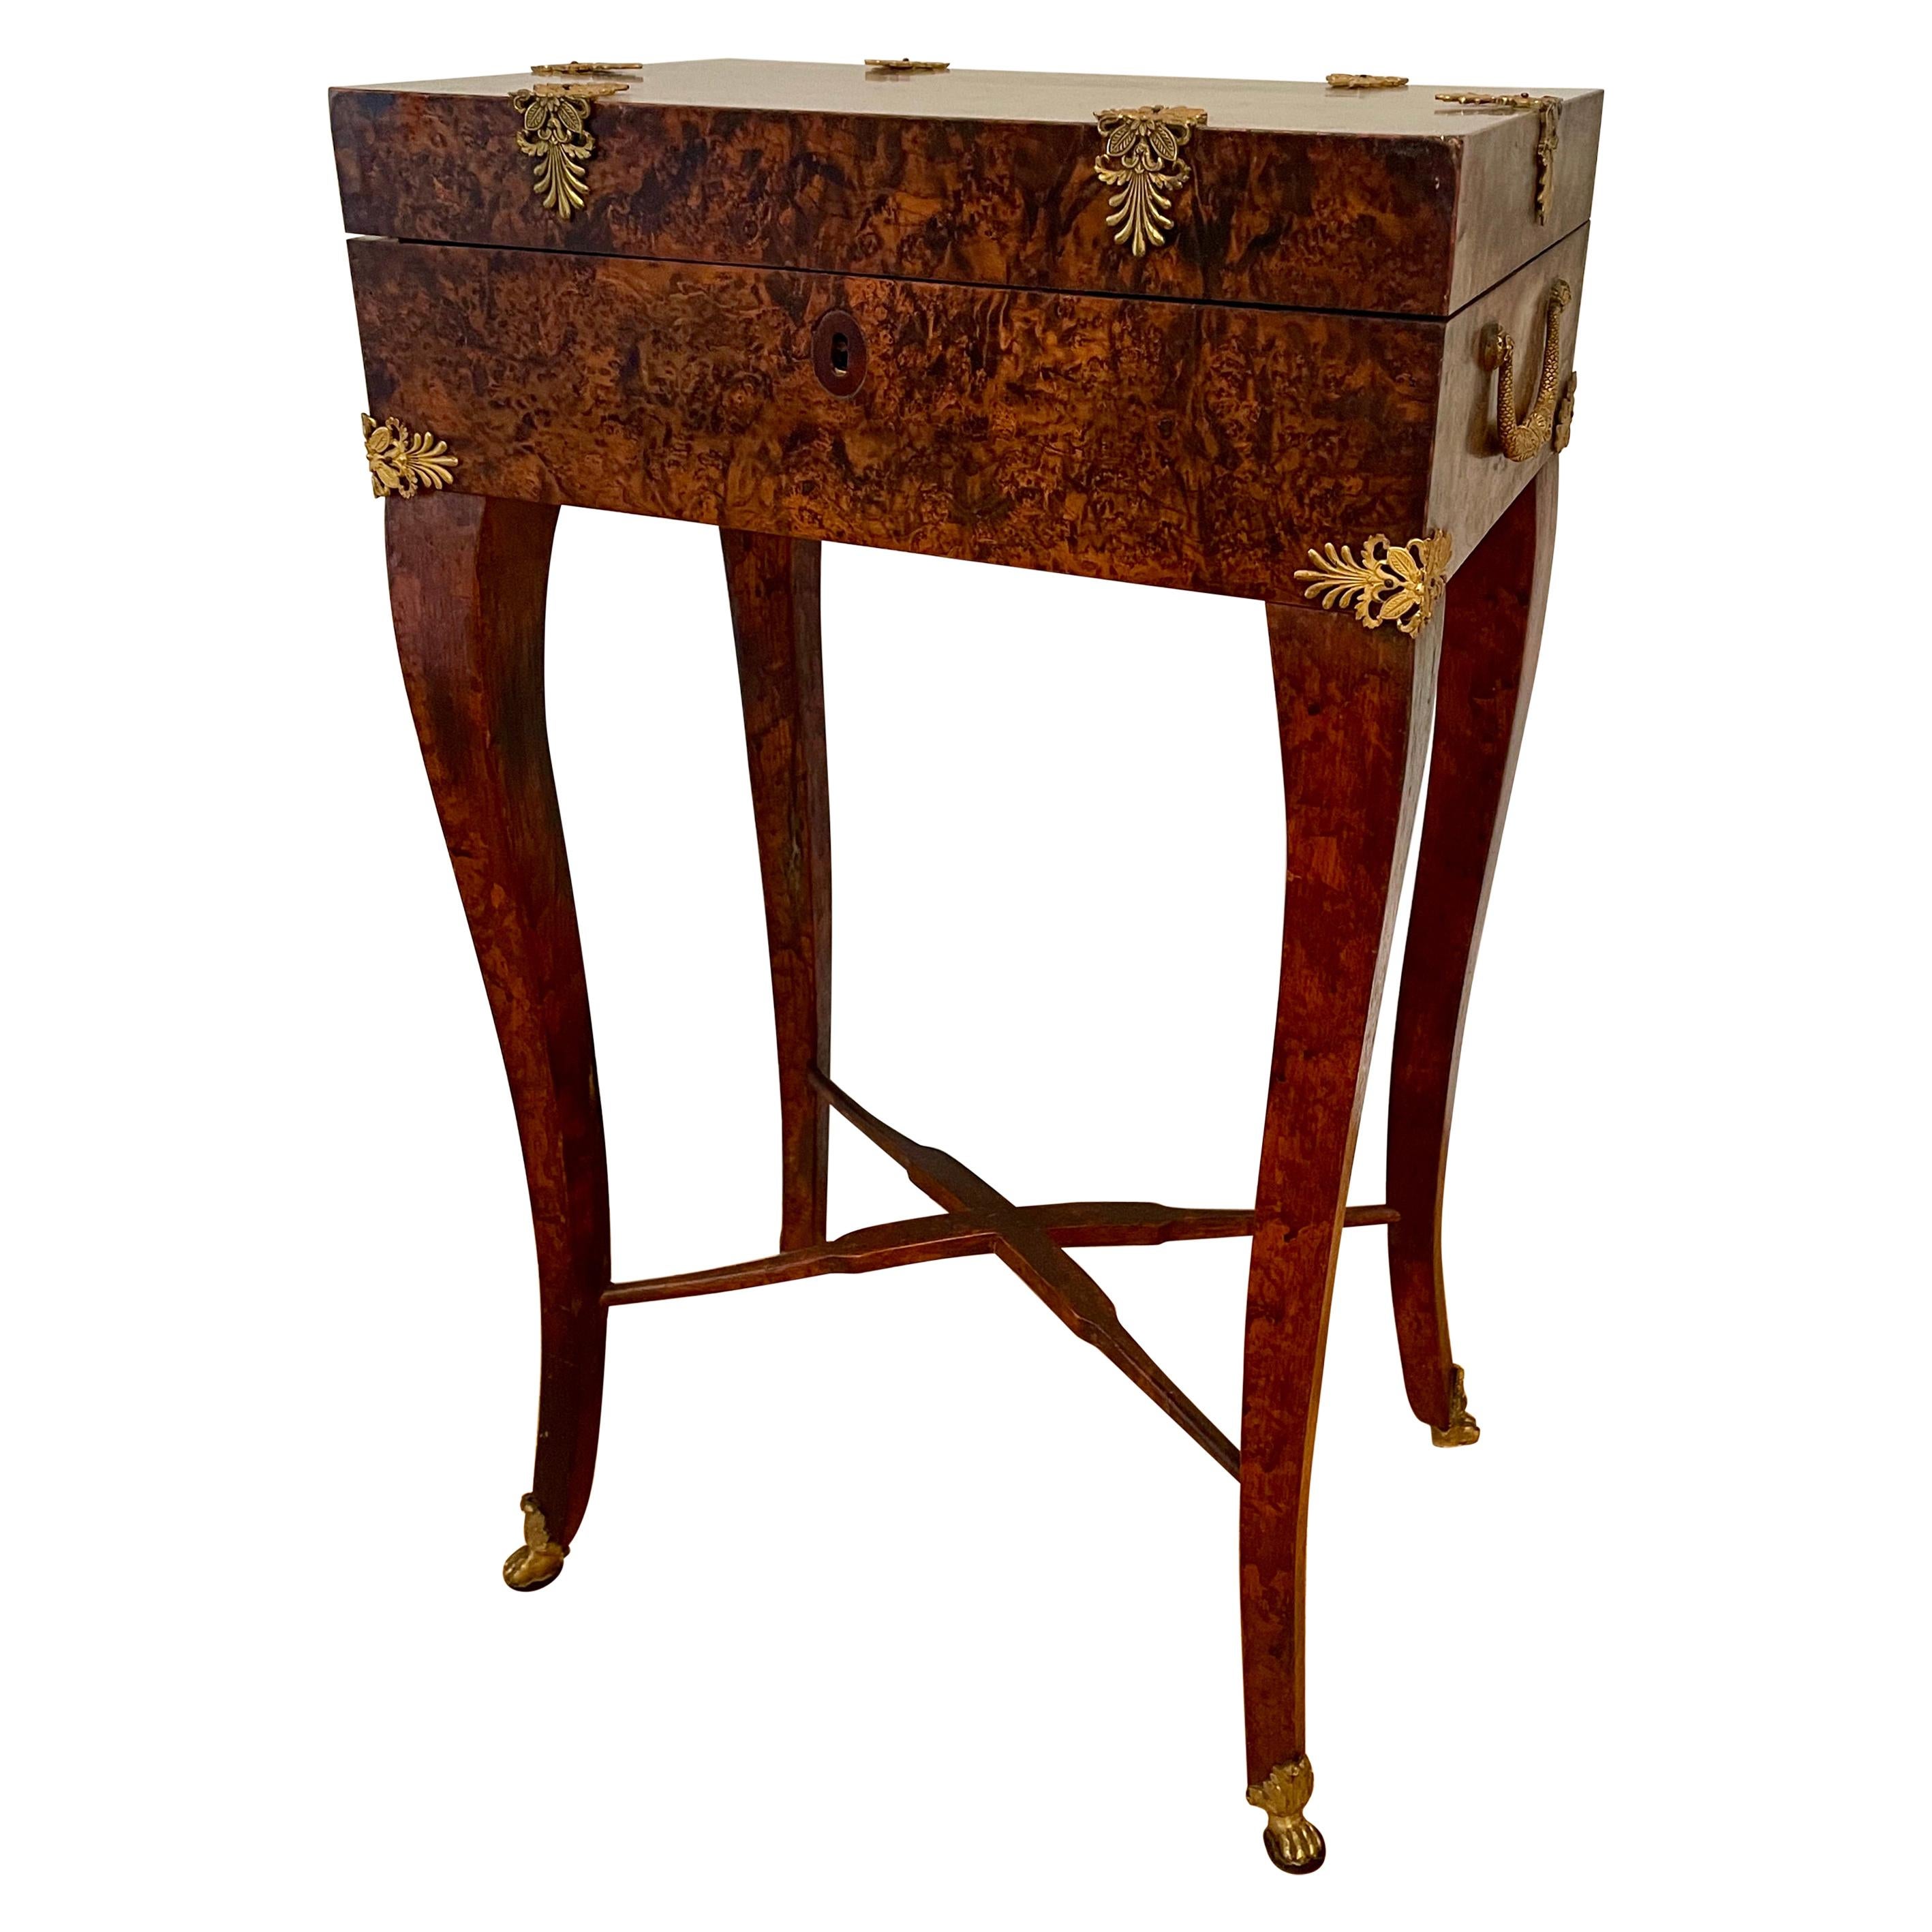 French Sewing Table, manner of Alphonse Giroux, Paris, 19th century.
This pretty small sewing table has a beautiful birds eye maple veneer and its original fittings.
It comes with some 19th century sewing utensils which have been probably